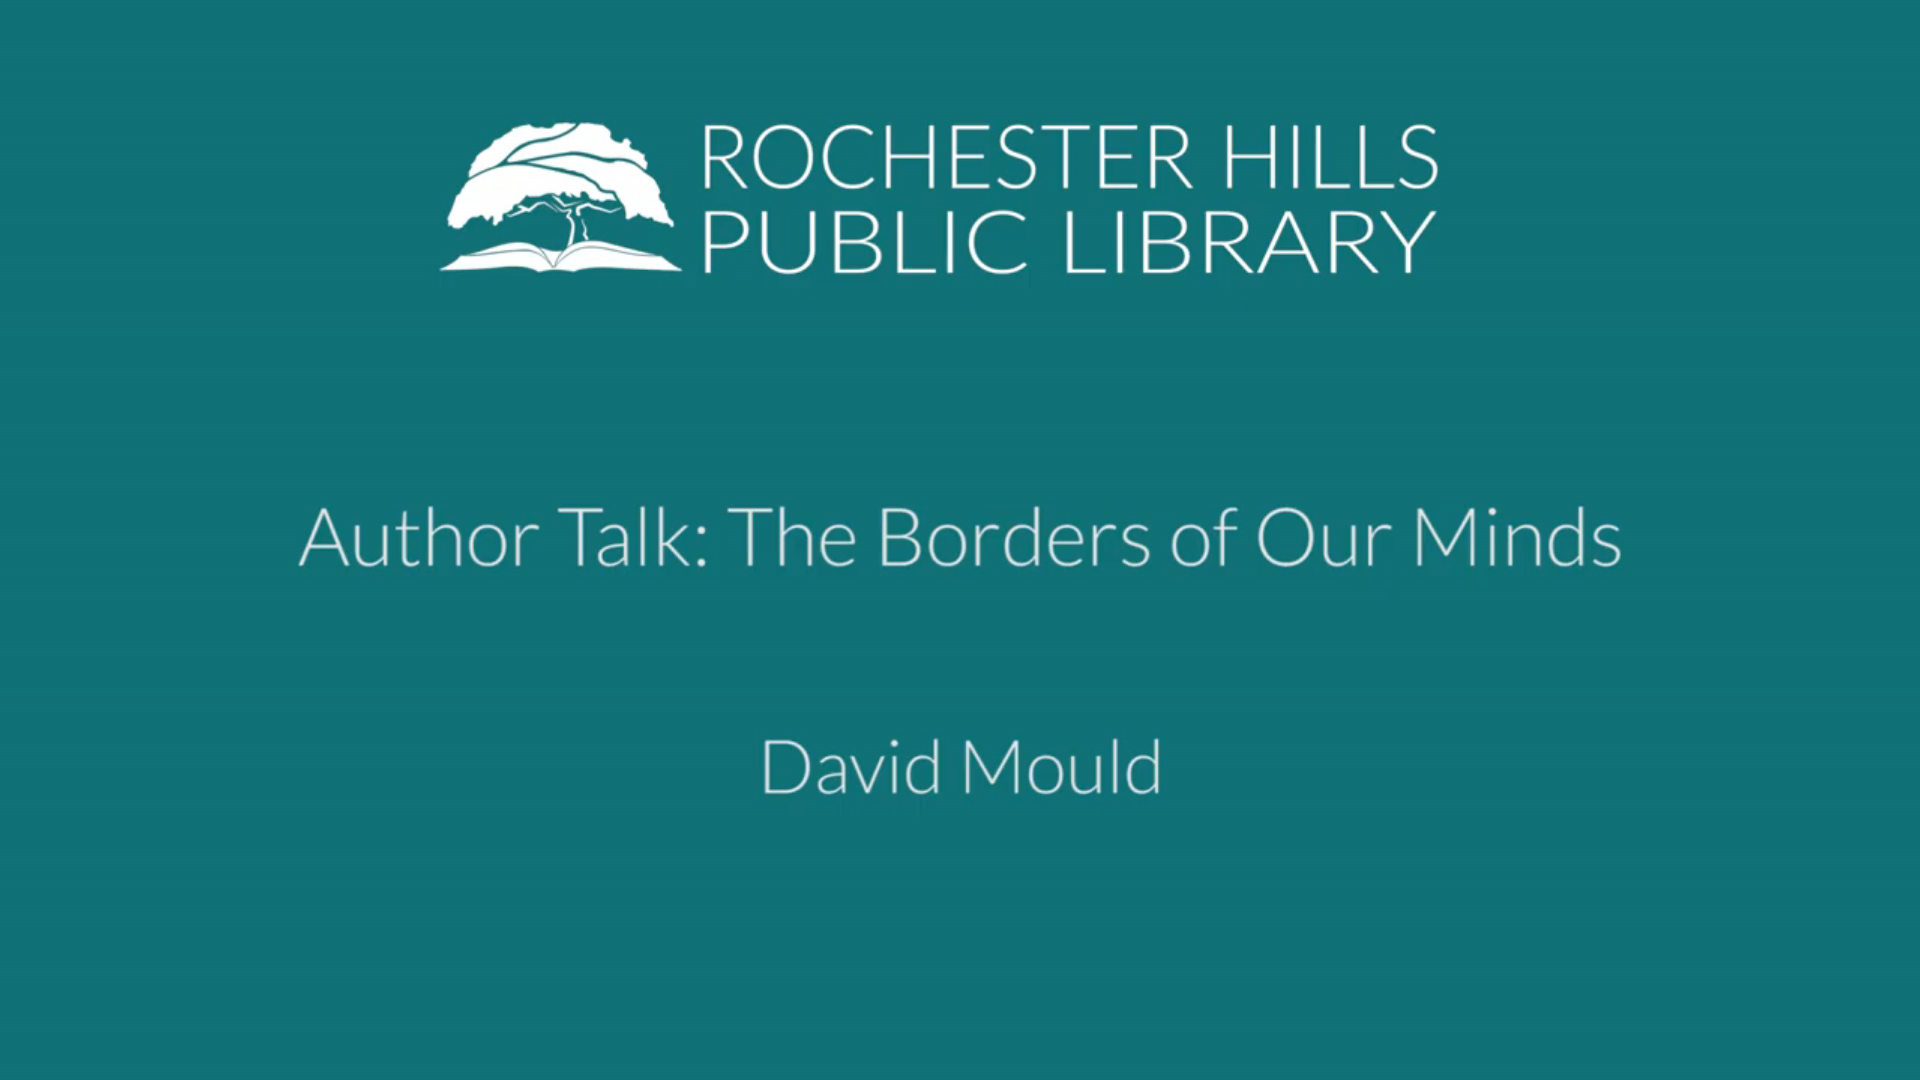 Author Talk: The Borders of Our Minds